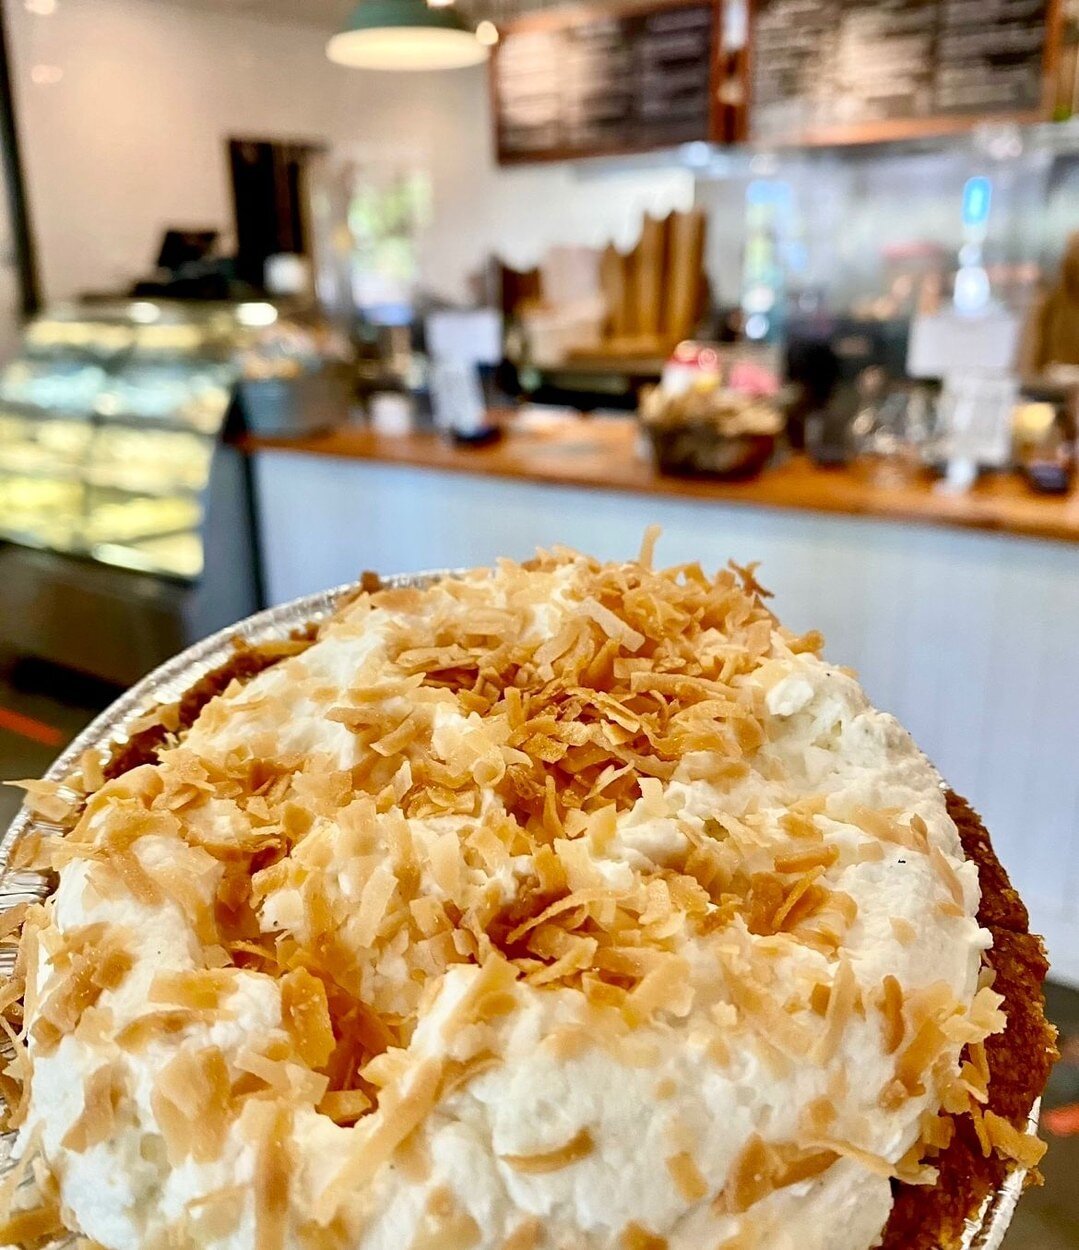 Did you know? Today is National Coconut Cream Pie Day. Just another great reason to stop by for pie! 🥥🥥

#nationalcoconutcreampieday #mauieatlocal